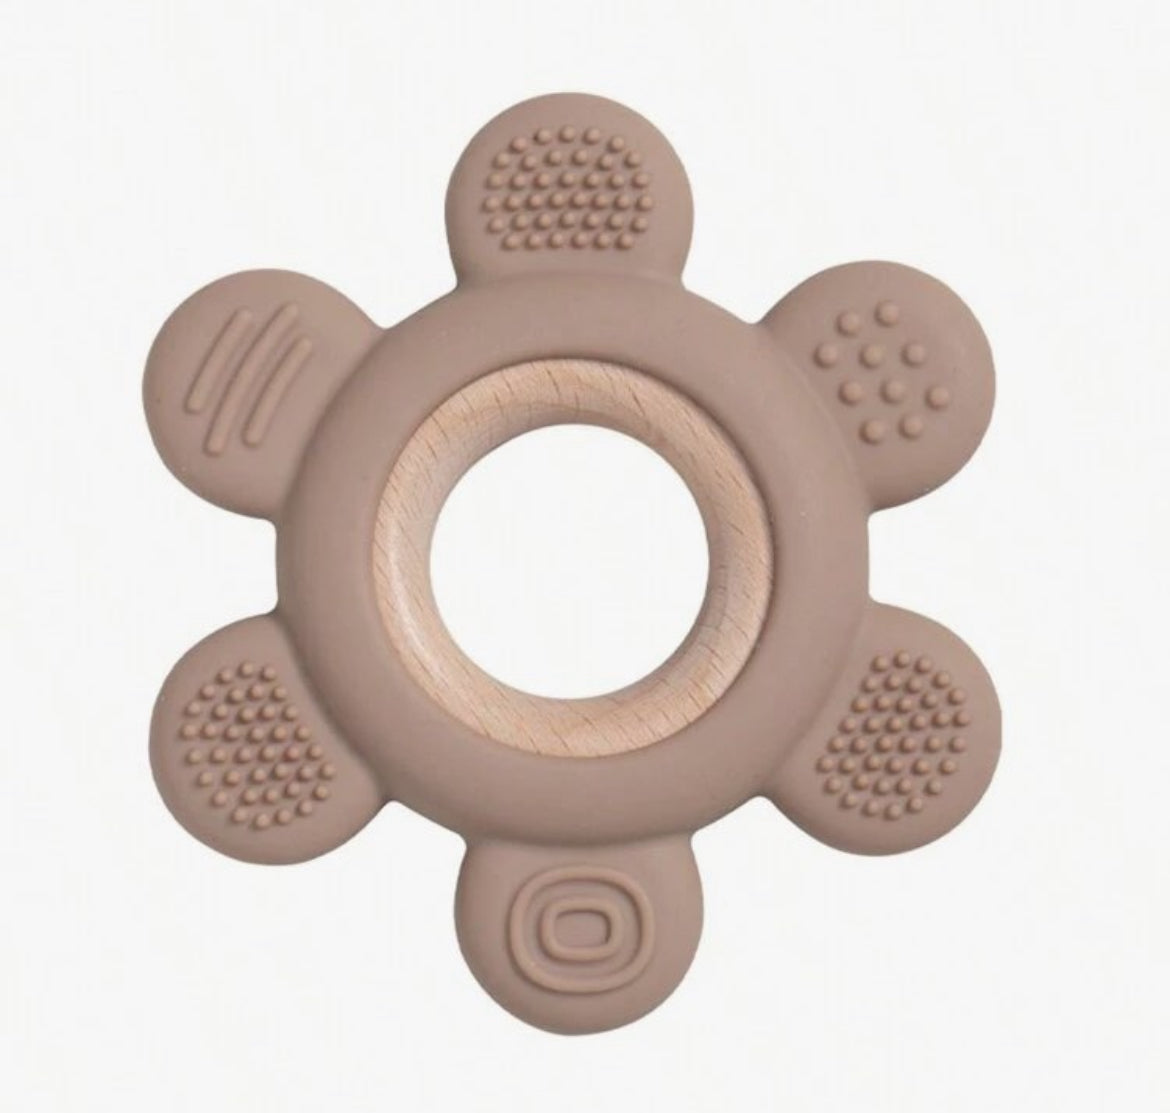 Wooden silicone teether